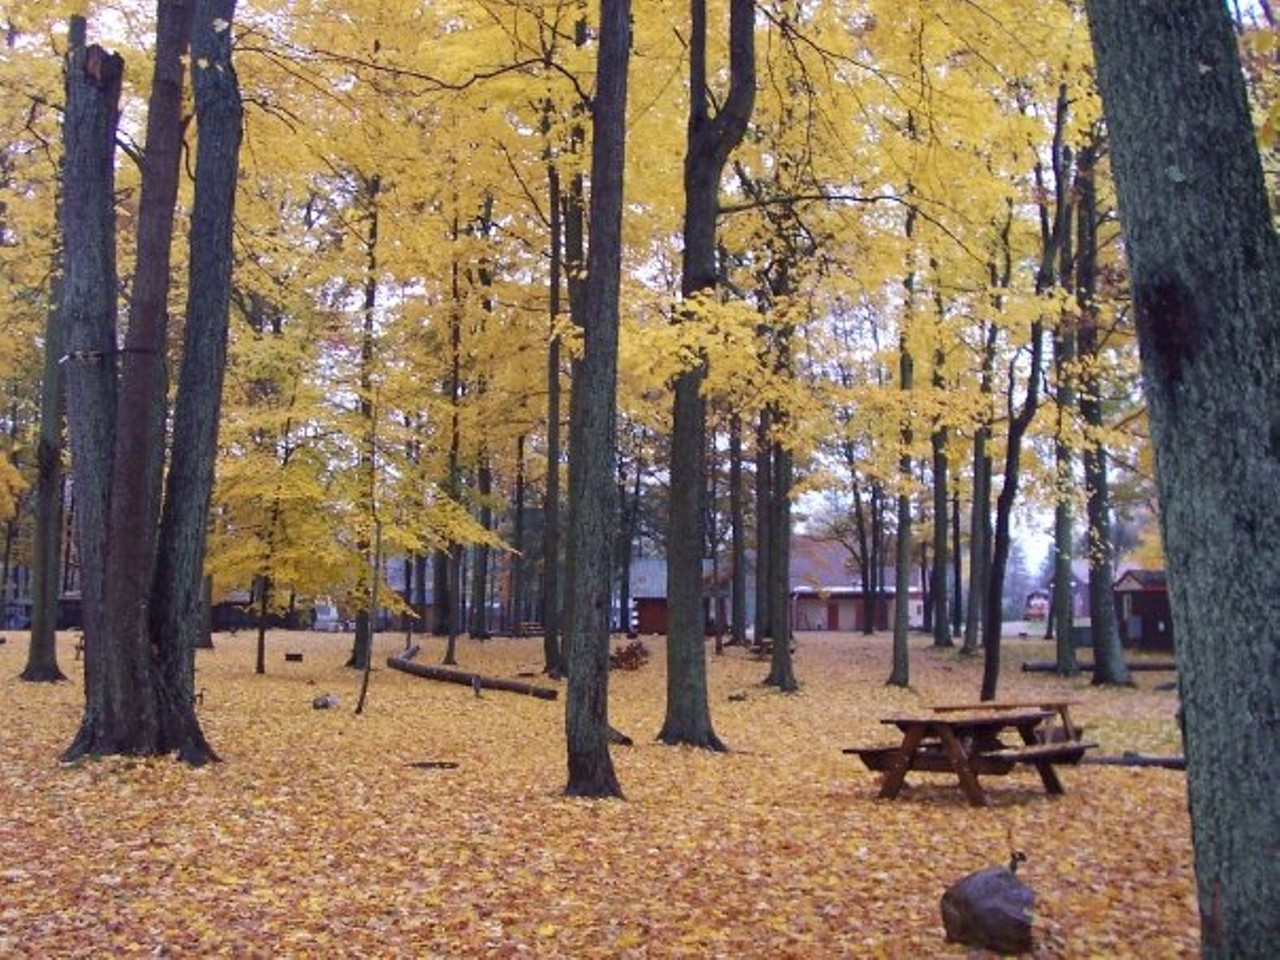  Duke Creek Campground 15190 White Creek Ave NE, Cedar SpringsEnjoy indoor and outdoor activities in these 36 acres located north of Grand Rapids. Camping cabins are offered with complimentary WiFi and hot showers. Duke Creek is loaded with family activities such as disc golf, swimming, basketball, tetherball, hayrides, indoor games, and volleyball.
Photo via  Duke Creek Campground / Facebook 